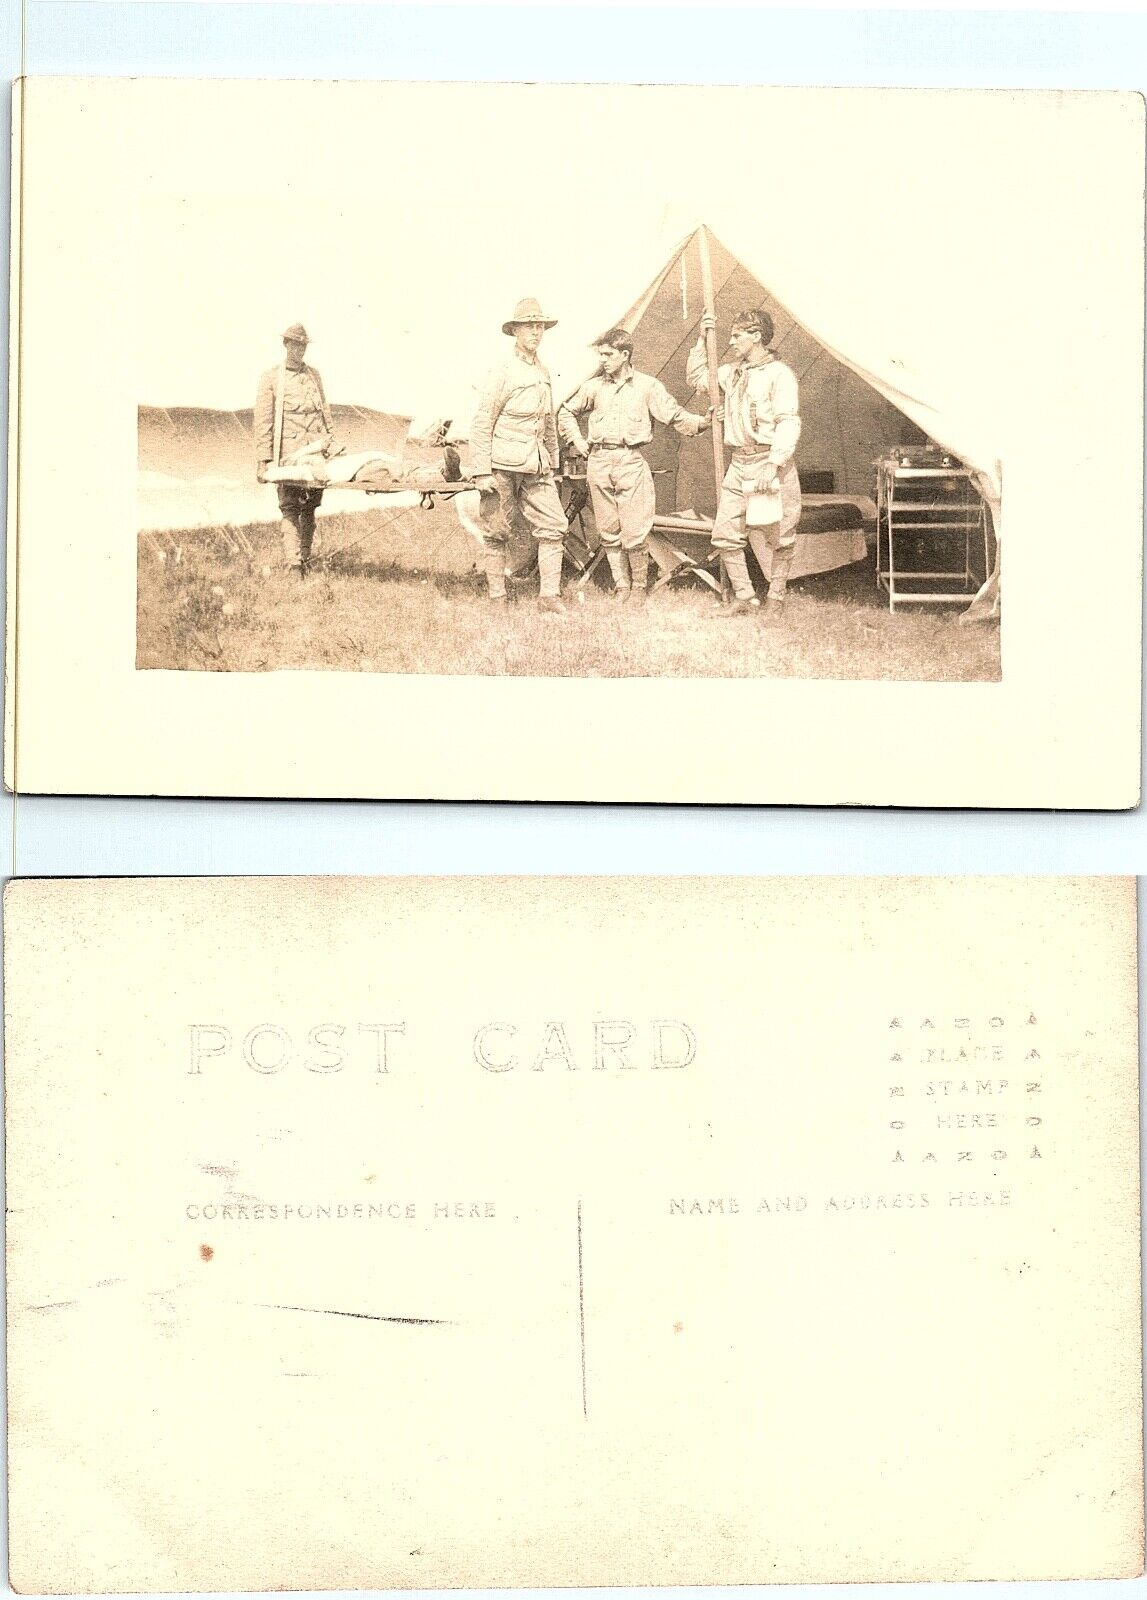 Medical Unit?  Soldiers at Camp WWI RPPC